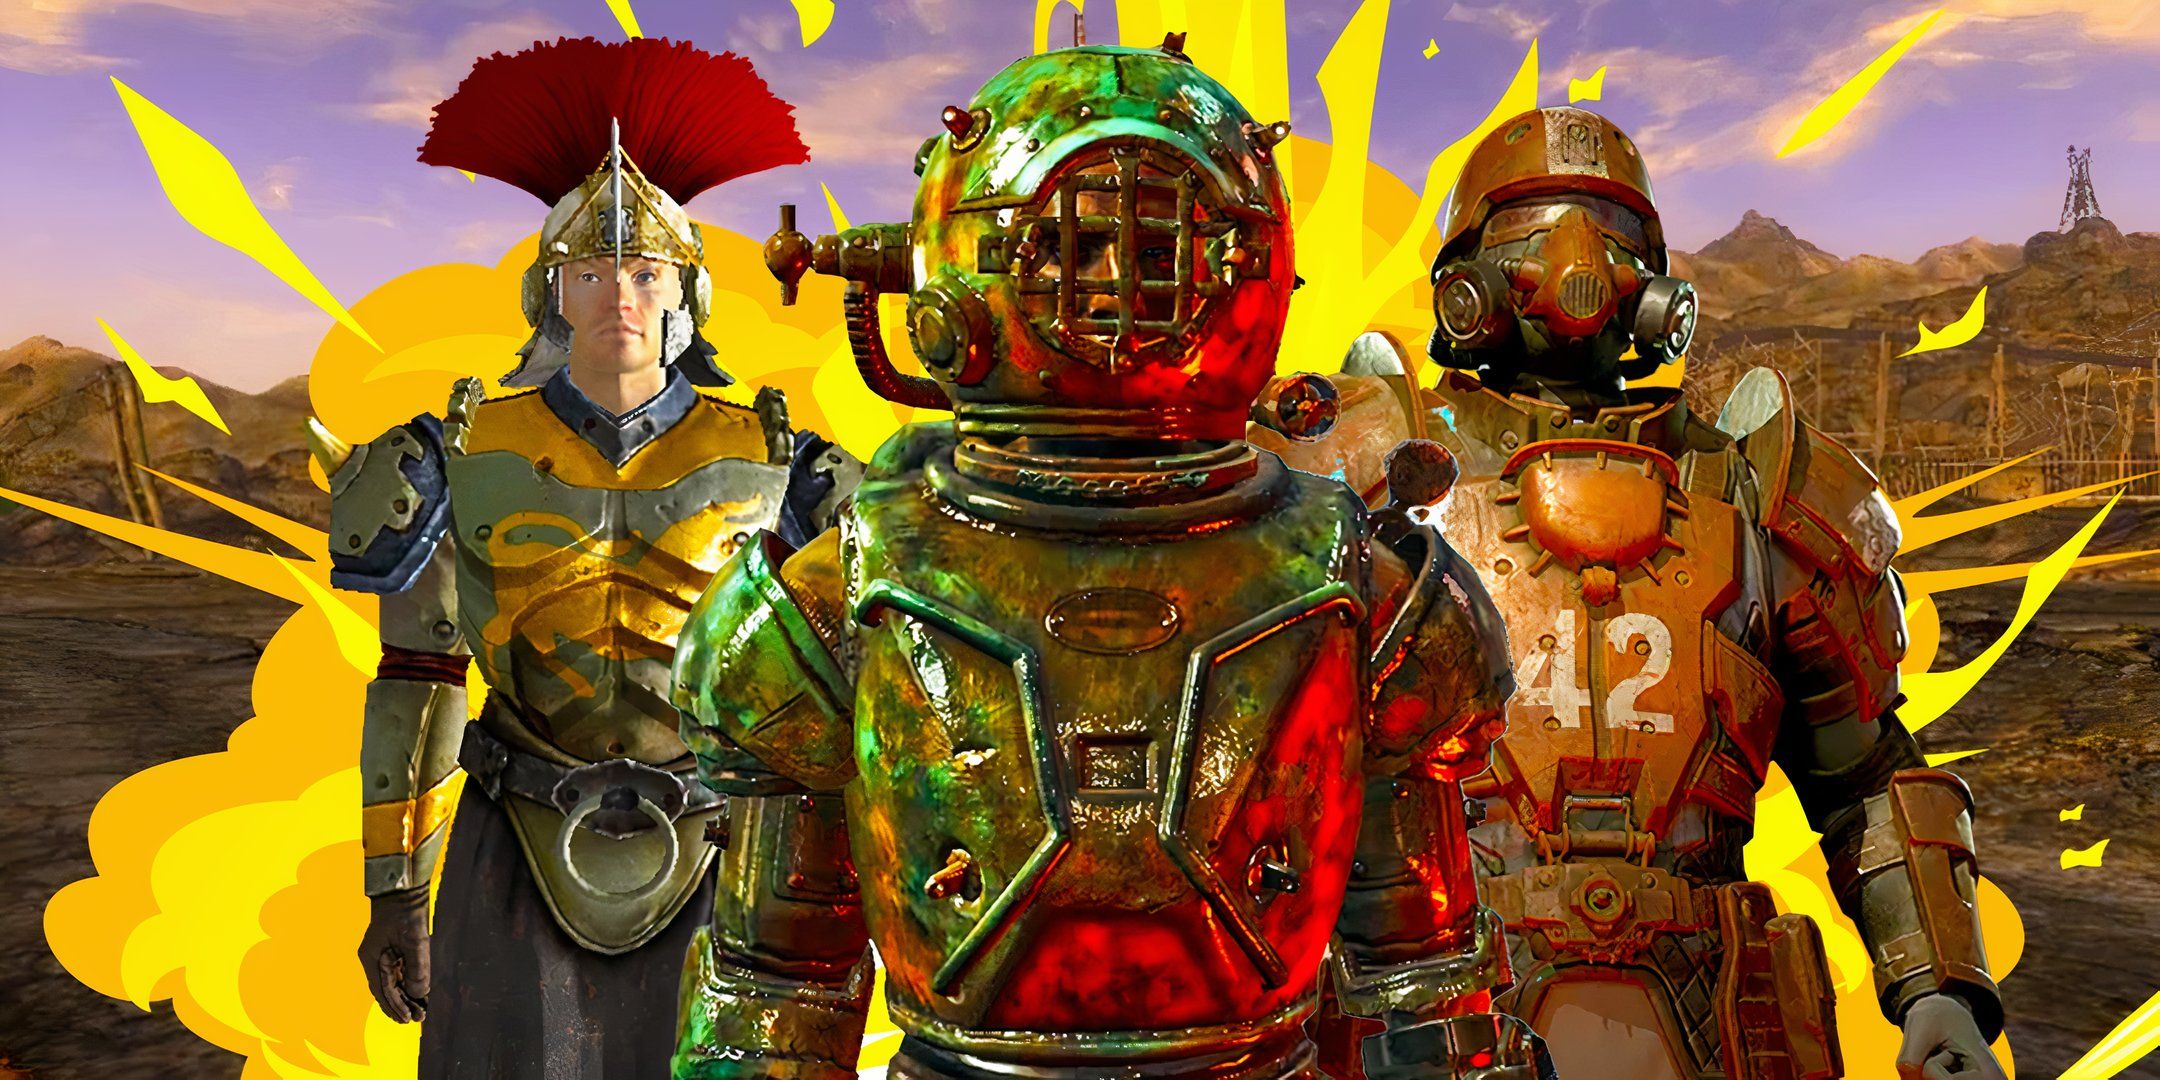 Characters wearing The Rescue Diver Suit, The Brotherhood Recon Armor, and The Armor Of The 87th Tribe from the Fallout Games